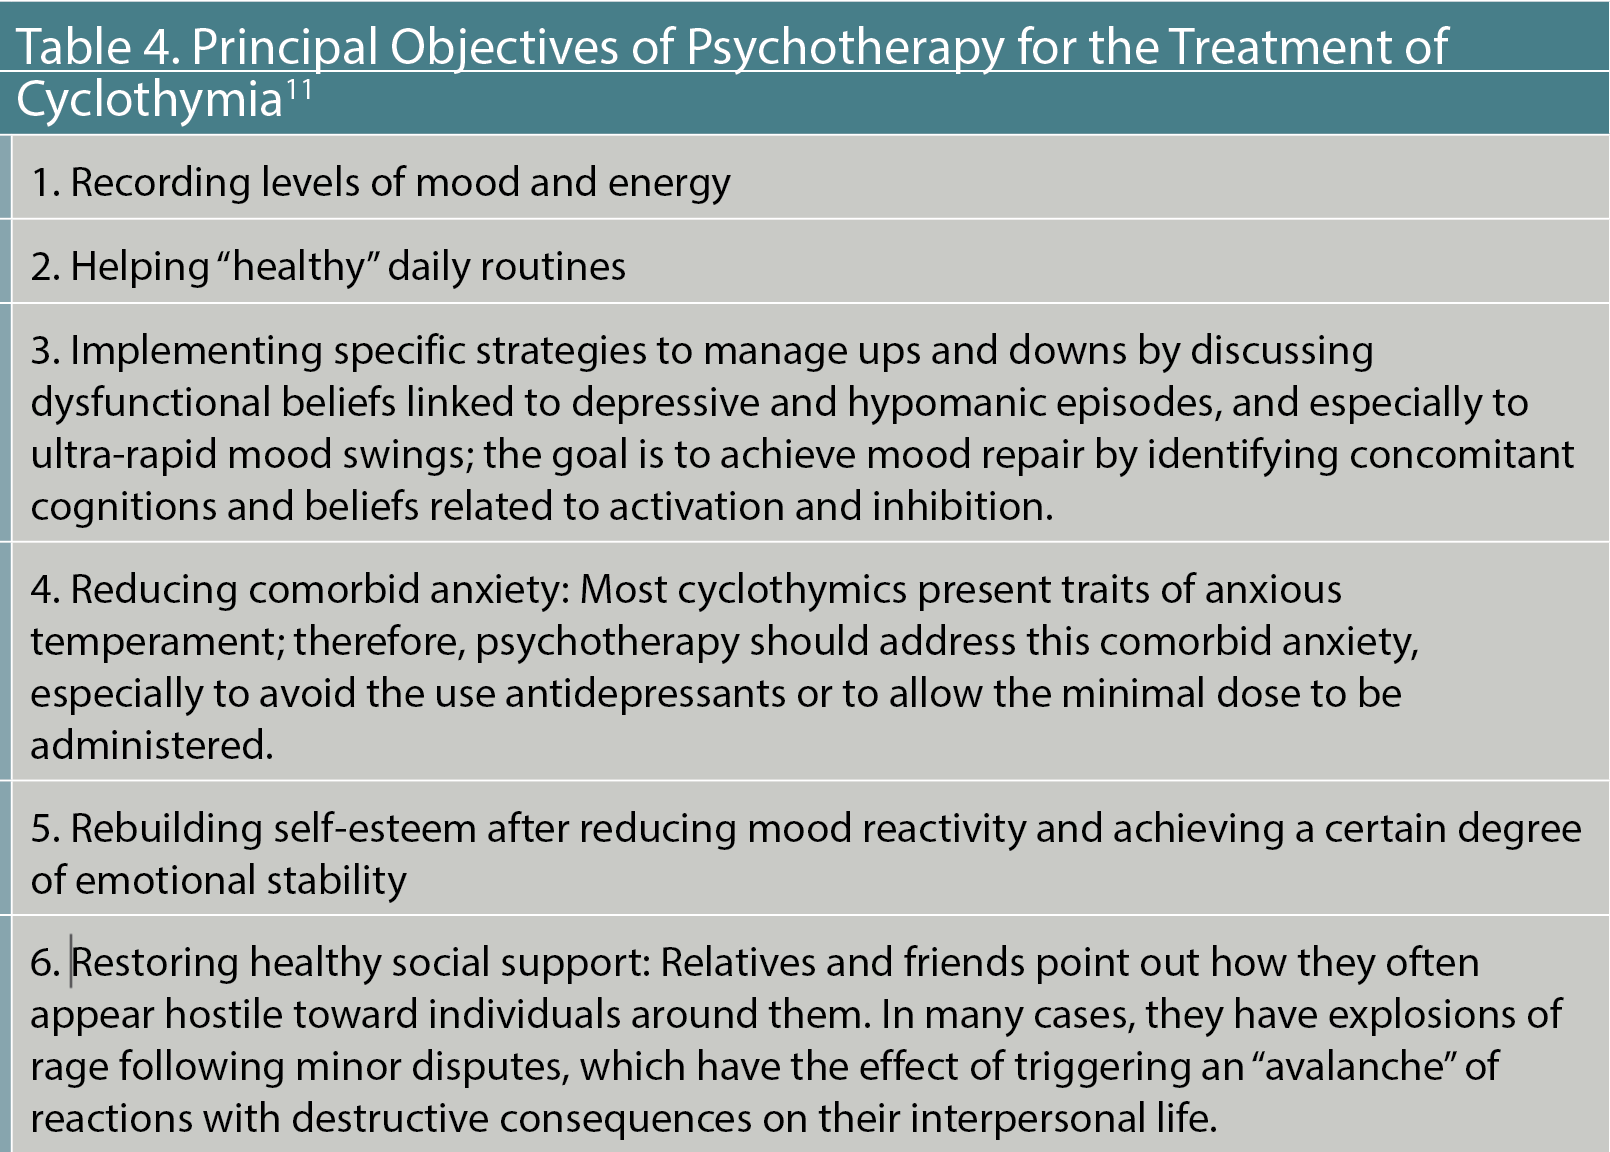 Table 4. Principal Objectives of Psychotherapy for the Treatment of Cyclothymia